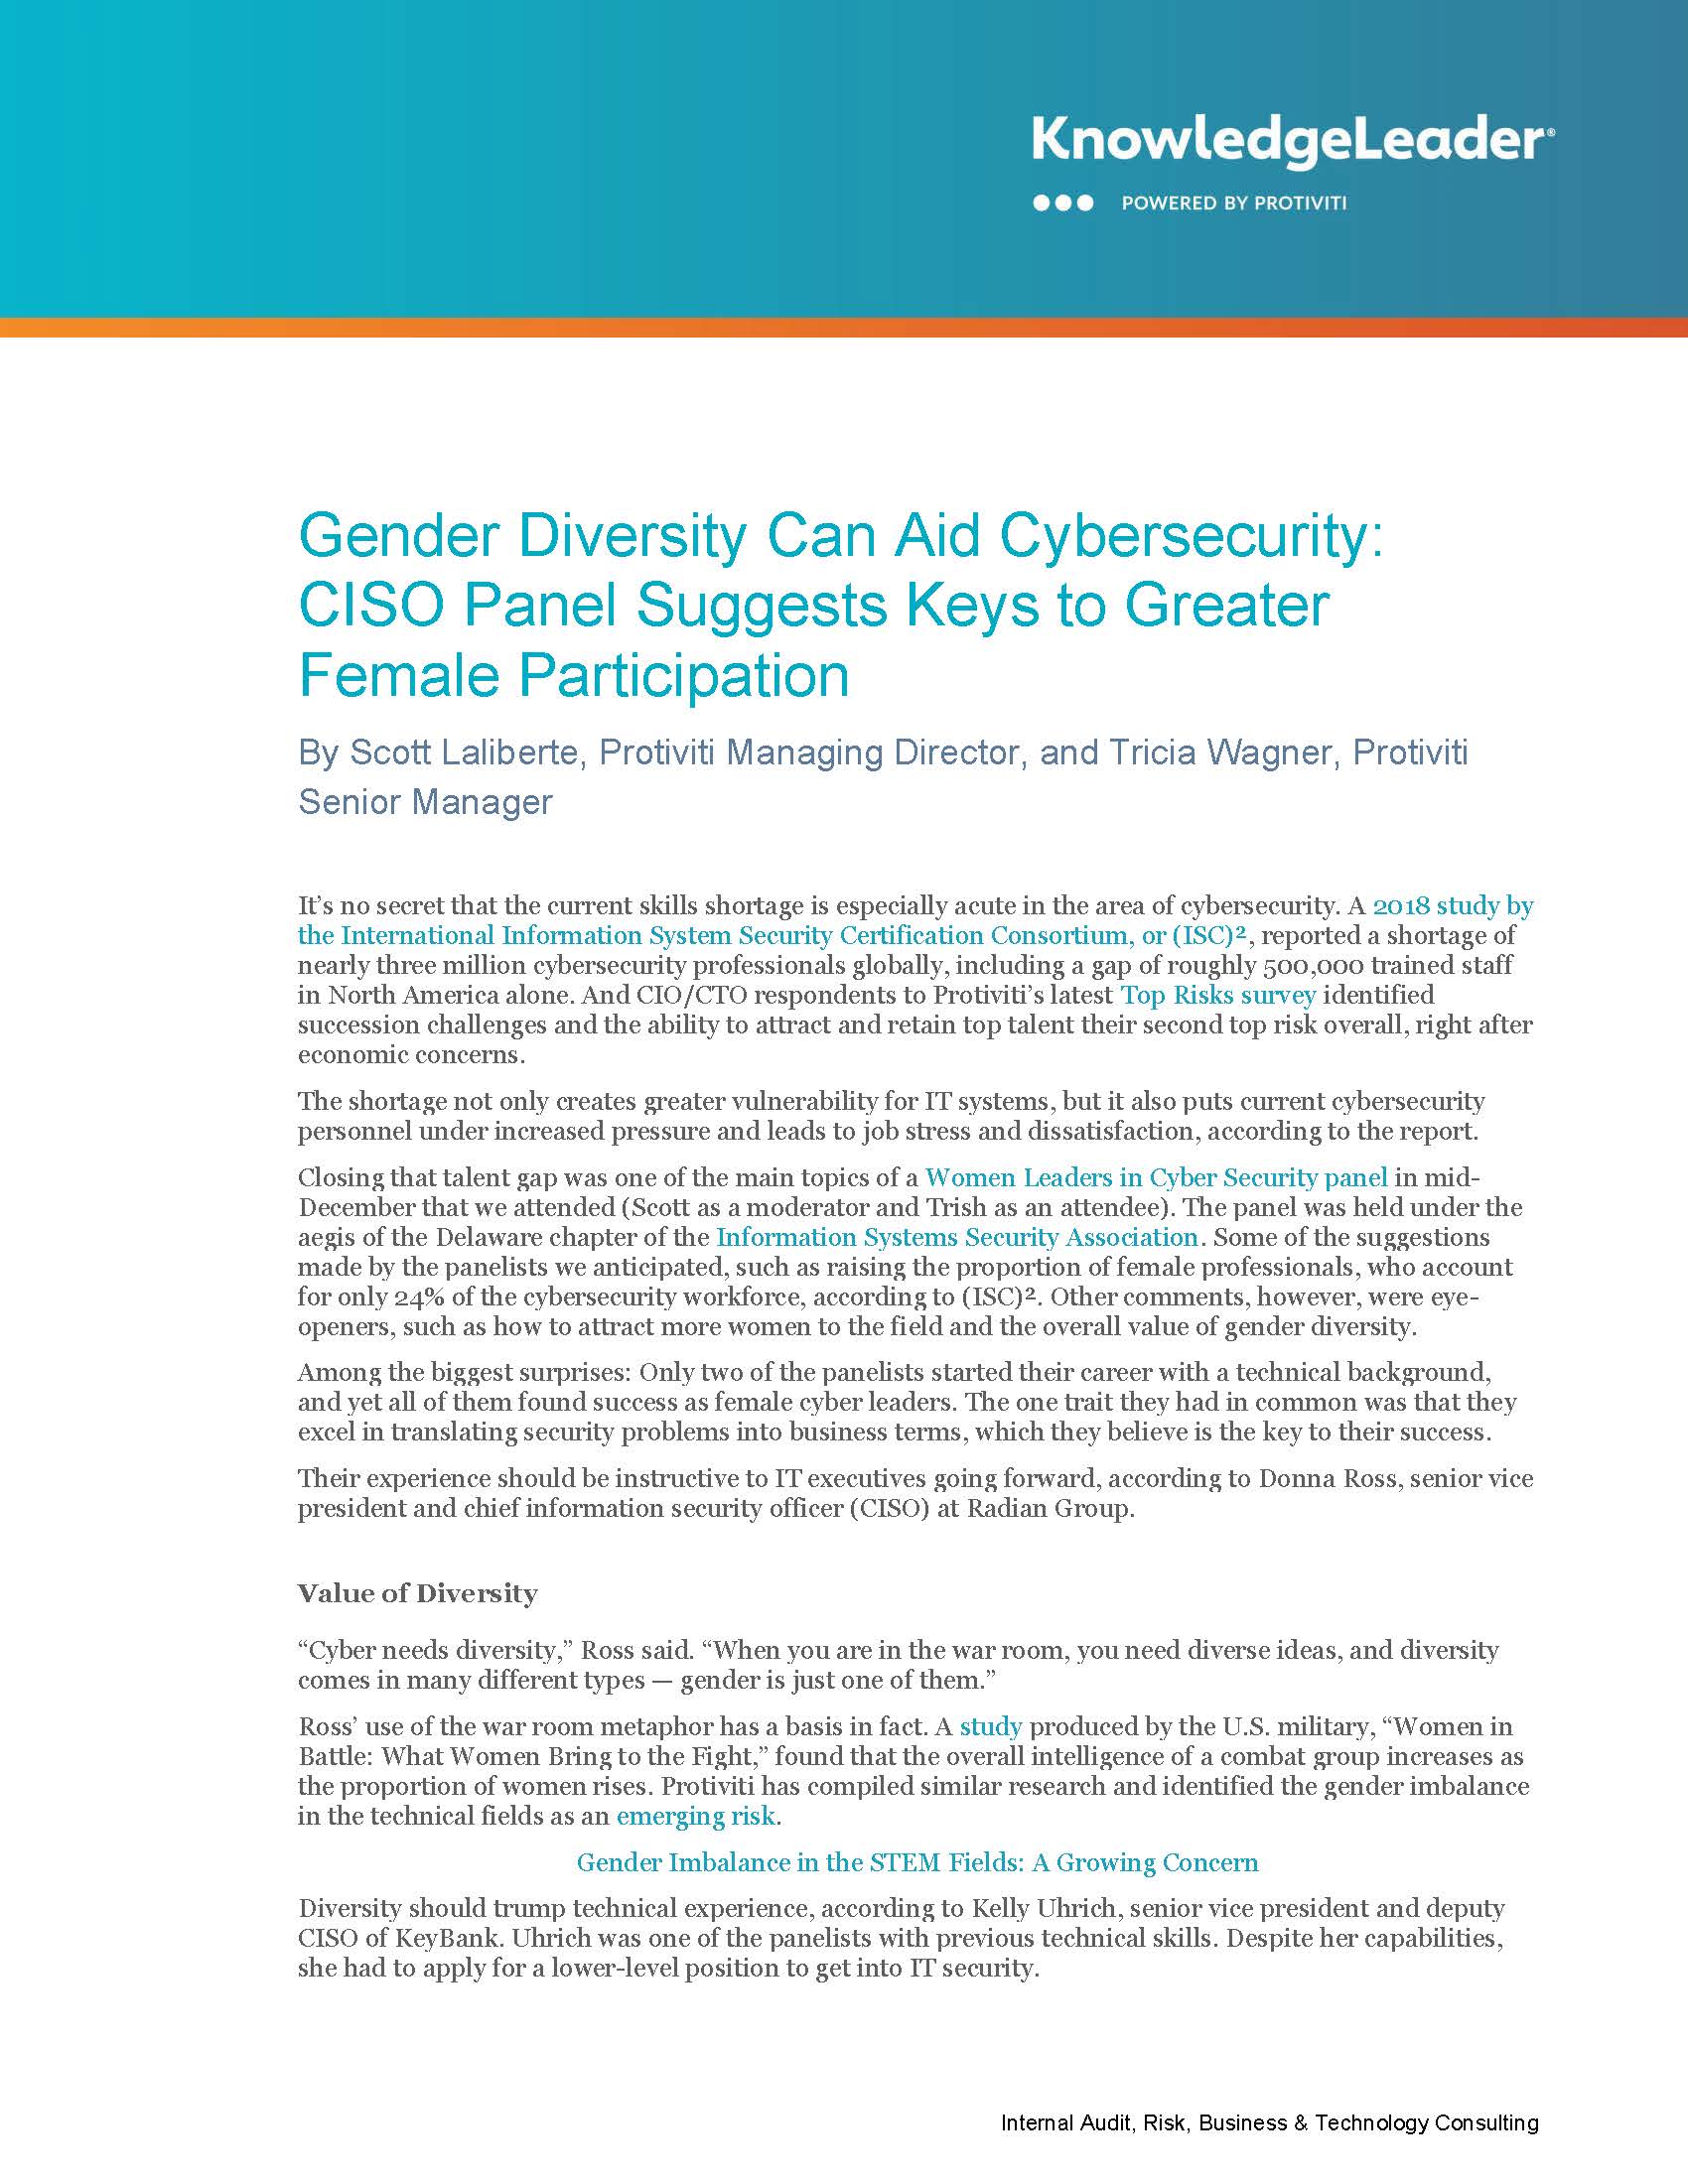 Gender Diversity Can Aid Cybersecurity CISO Panel Suggets